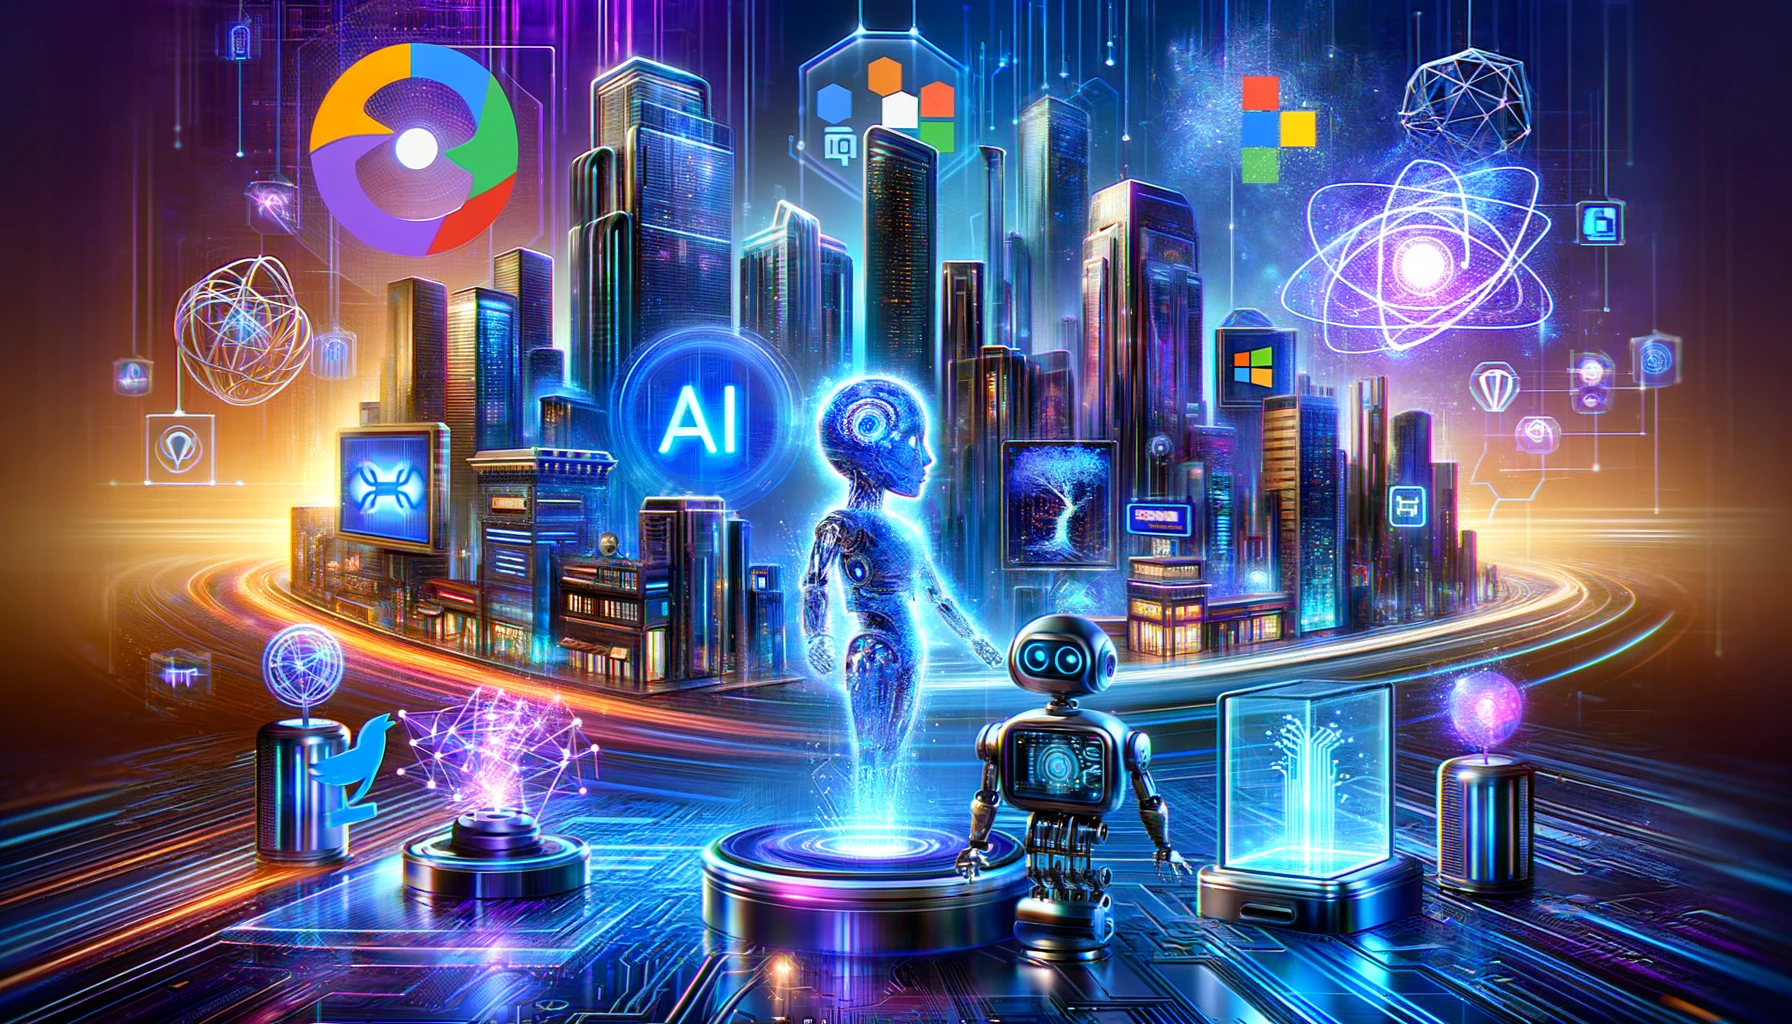 Futuristic cityscape showing AI breakthroughs and robot figures connected by glowing data streams. Surrounding them are various tech symbols, including social media, programming languages, and scientific icons, all set against a vibrant, neon-lit skyline.